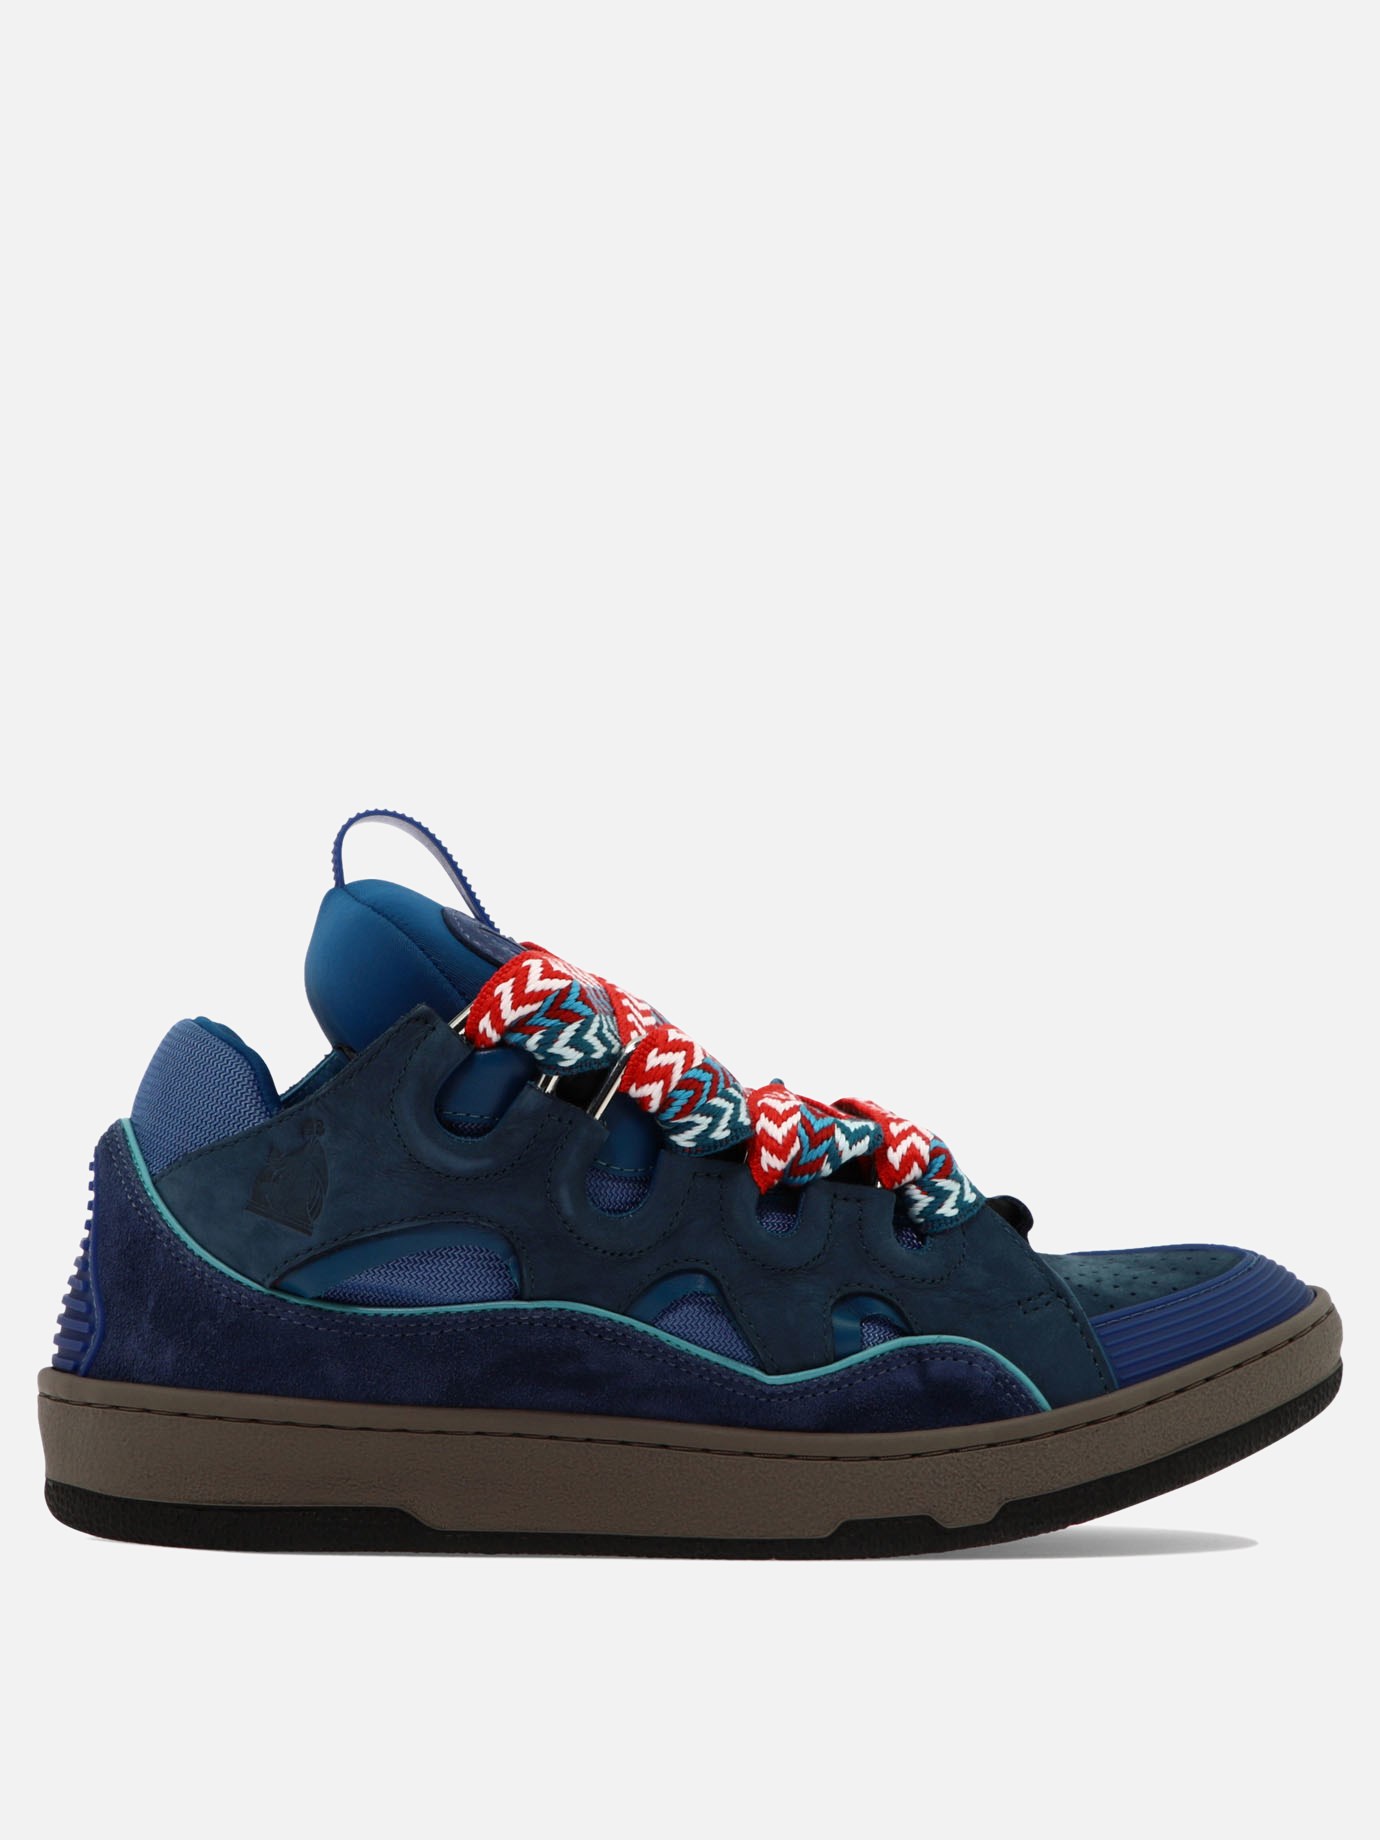  Curb  sneakers by Lanvin